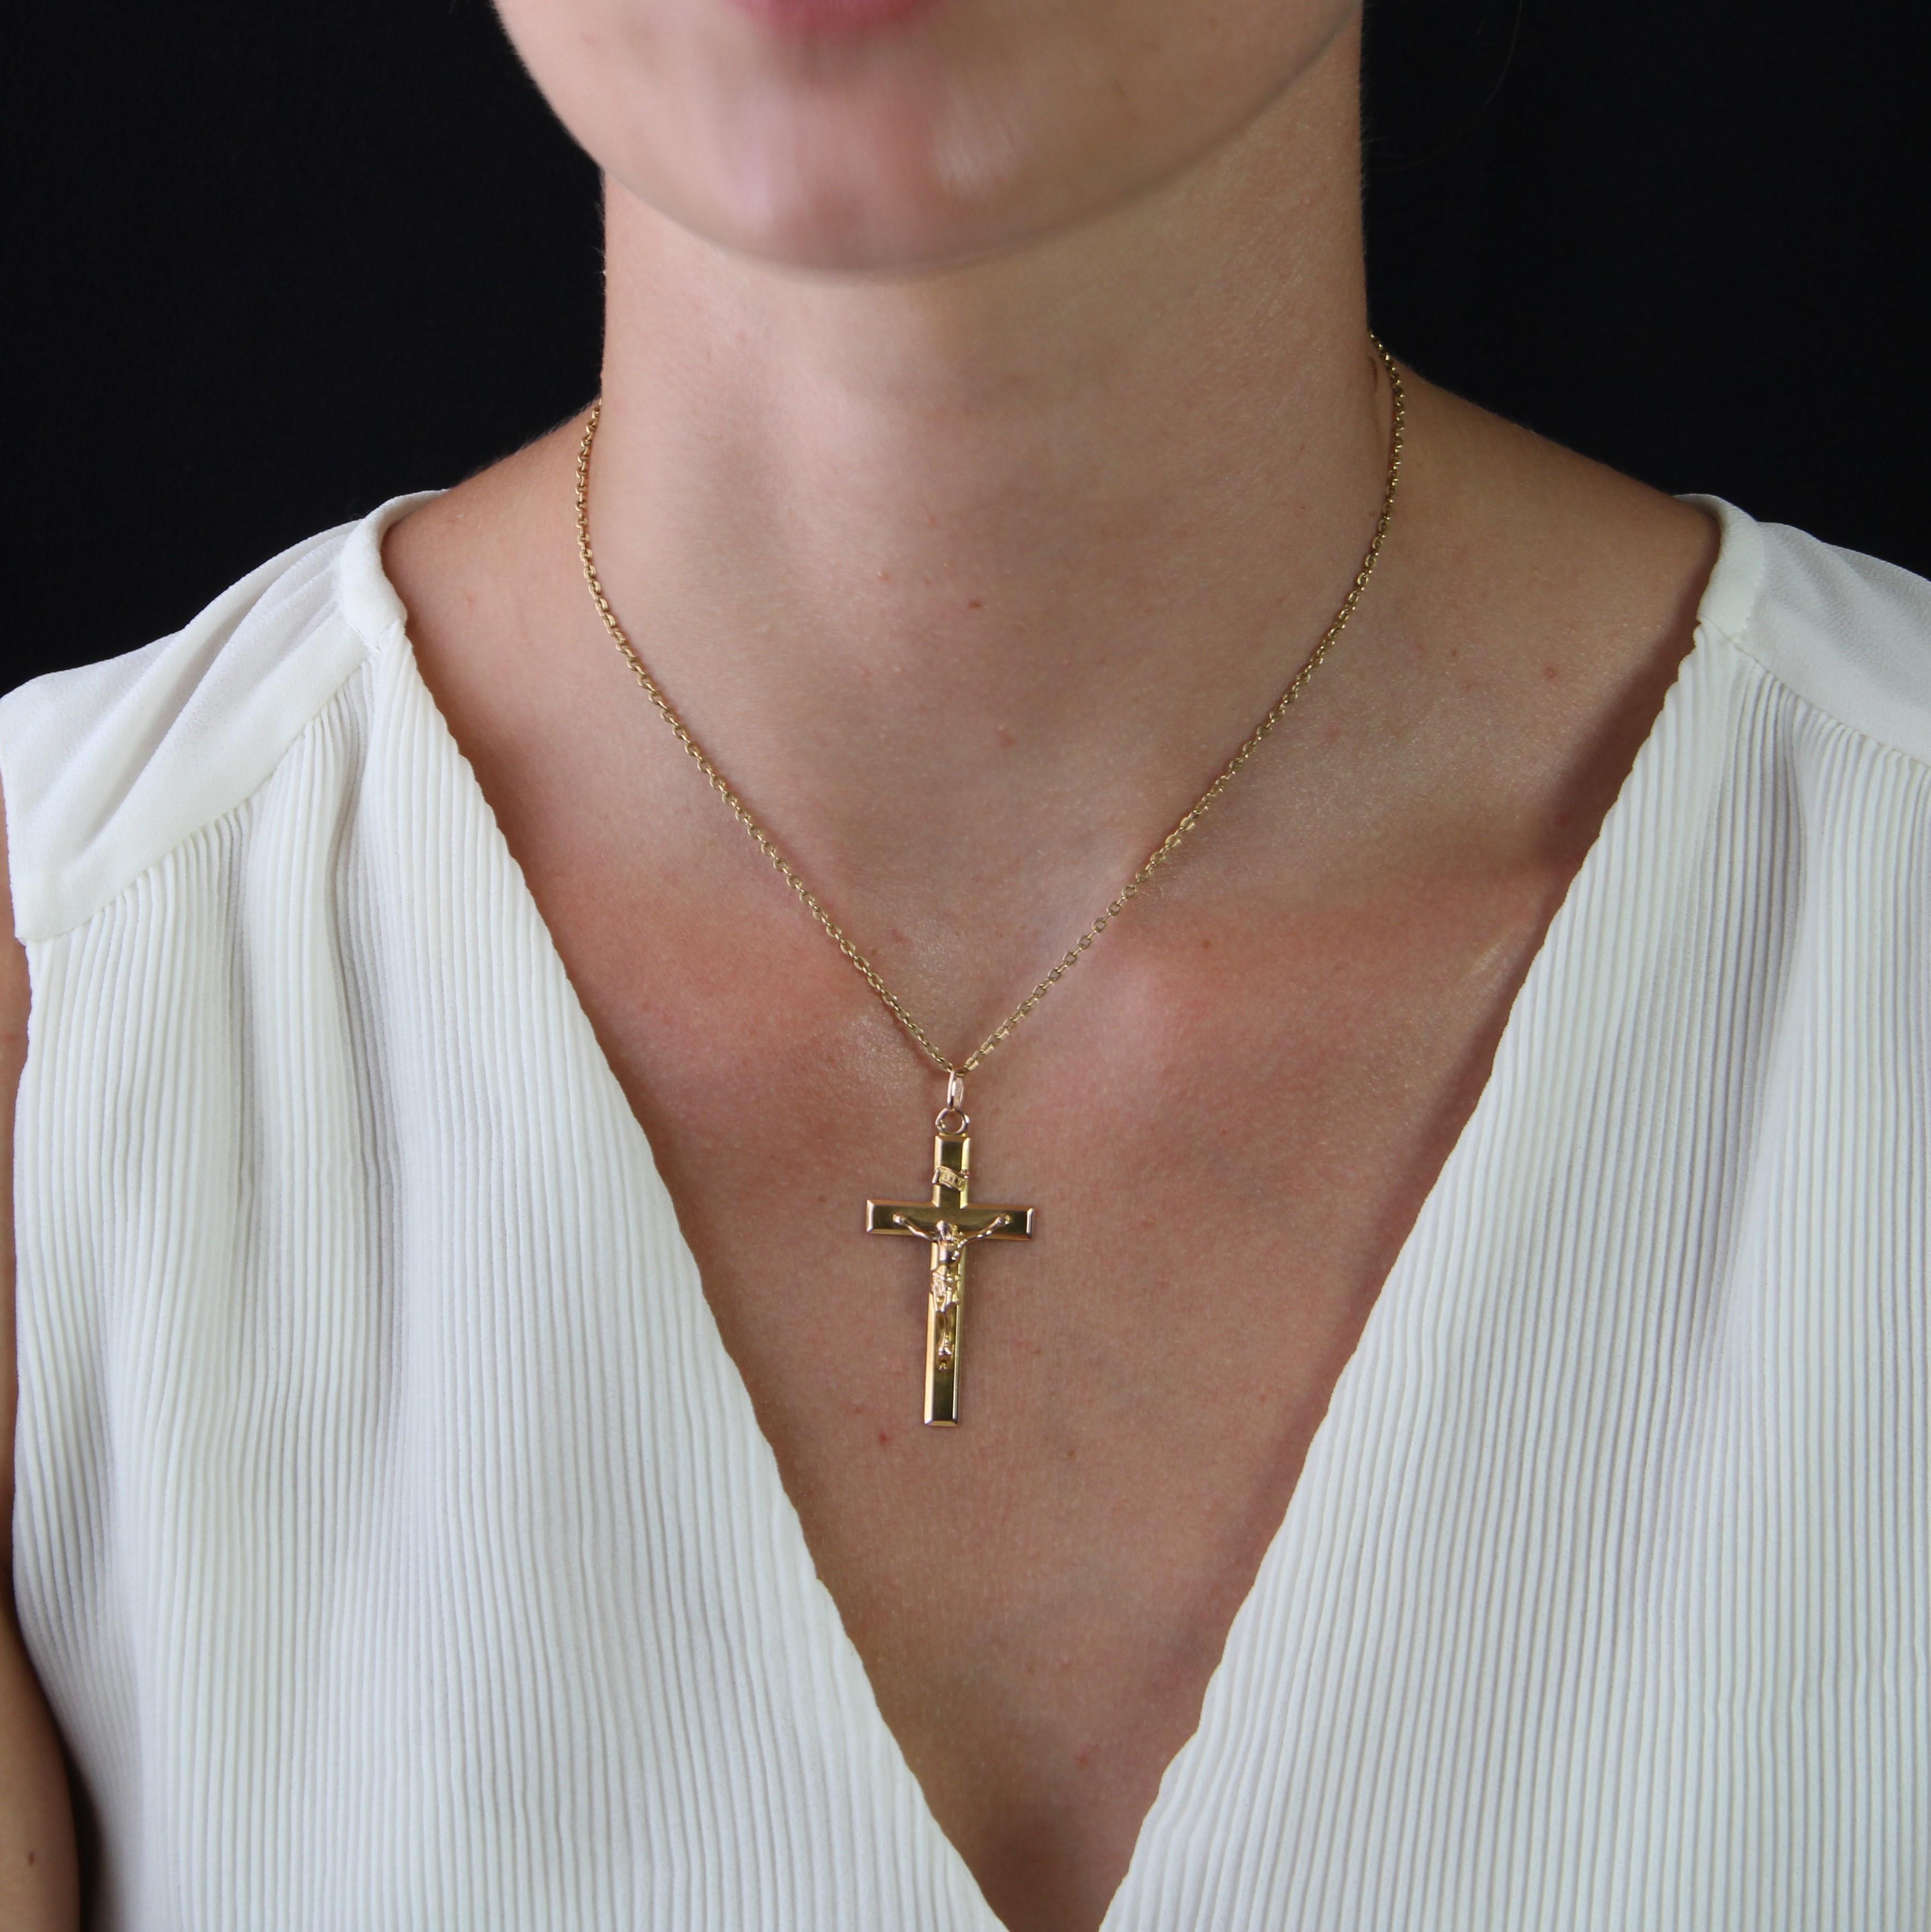 Cross in 18 karat rose gold, horse head hallmark.
This antique rose gold cross features an applied representation of Christ and the acronym INRI on a banner. The edge of the cross is beveled, giving it relief.
Pendant sold alone without its